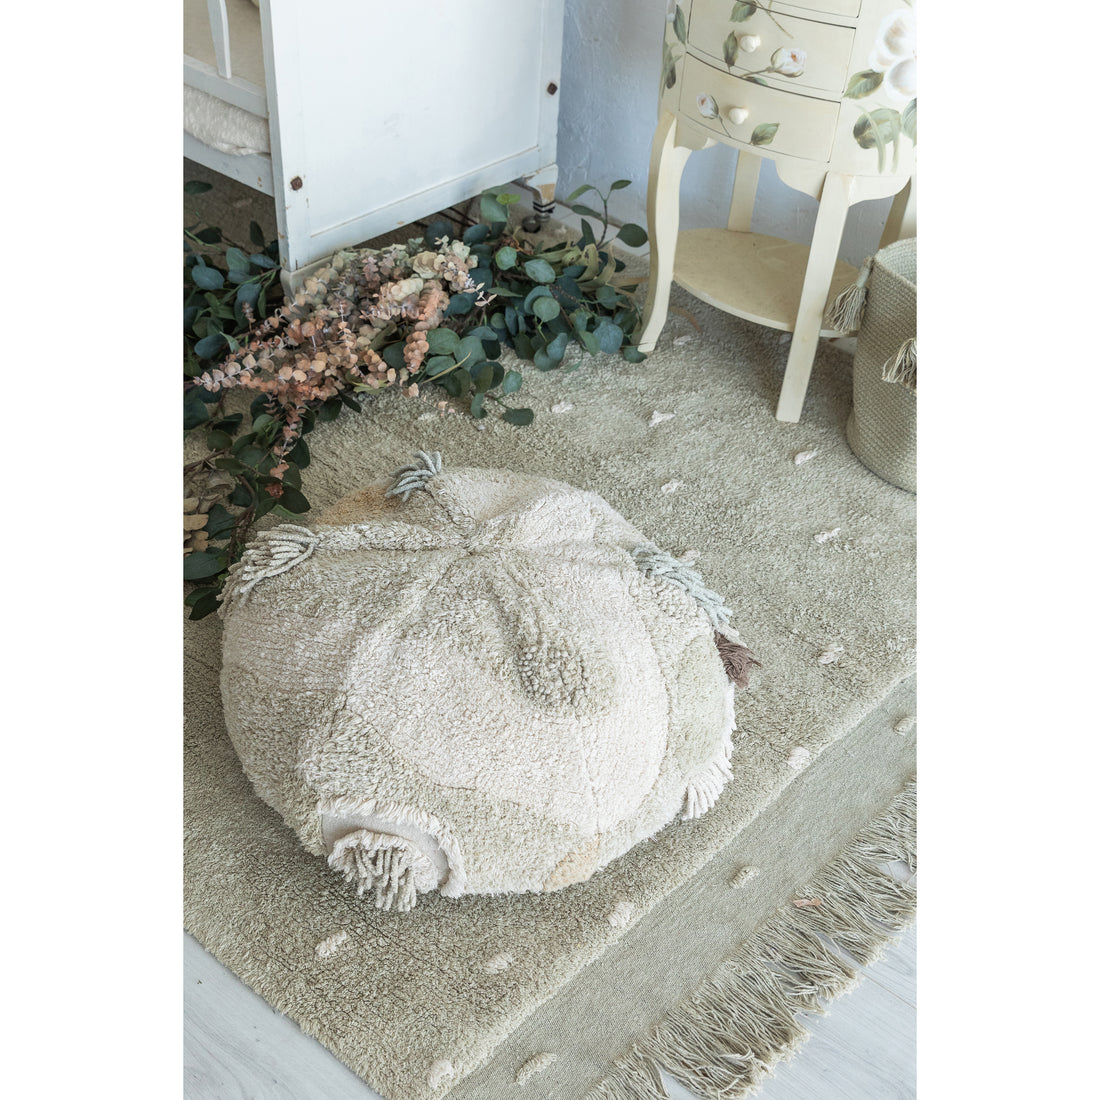 lorena-canals-cotton-woods-mossy-rock-pouffe- (8)